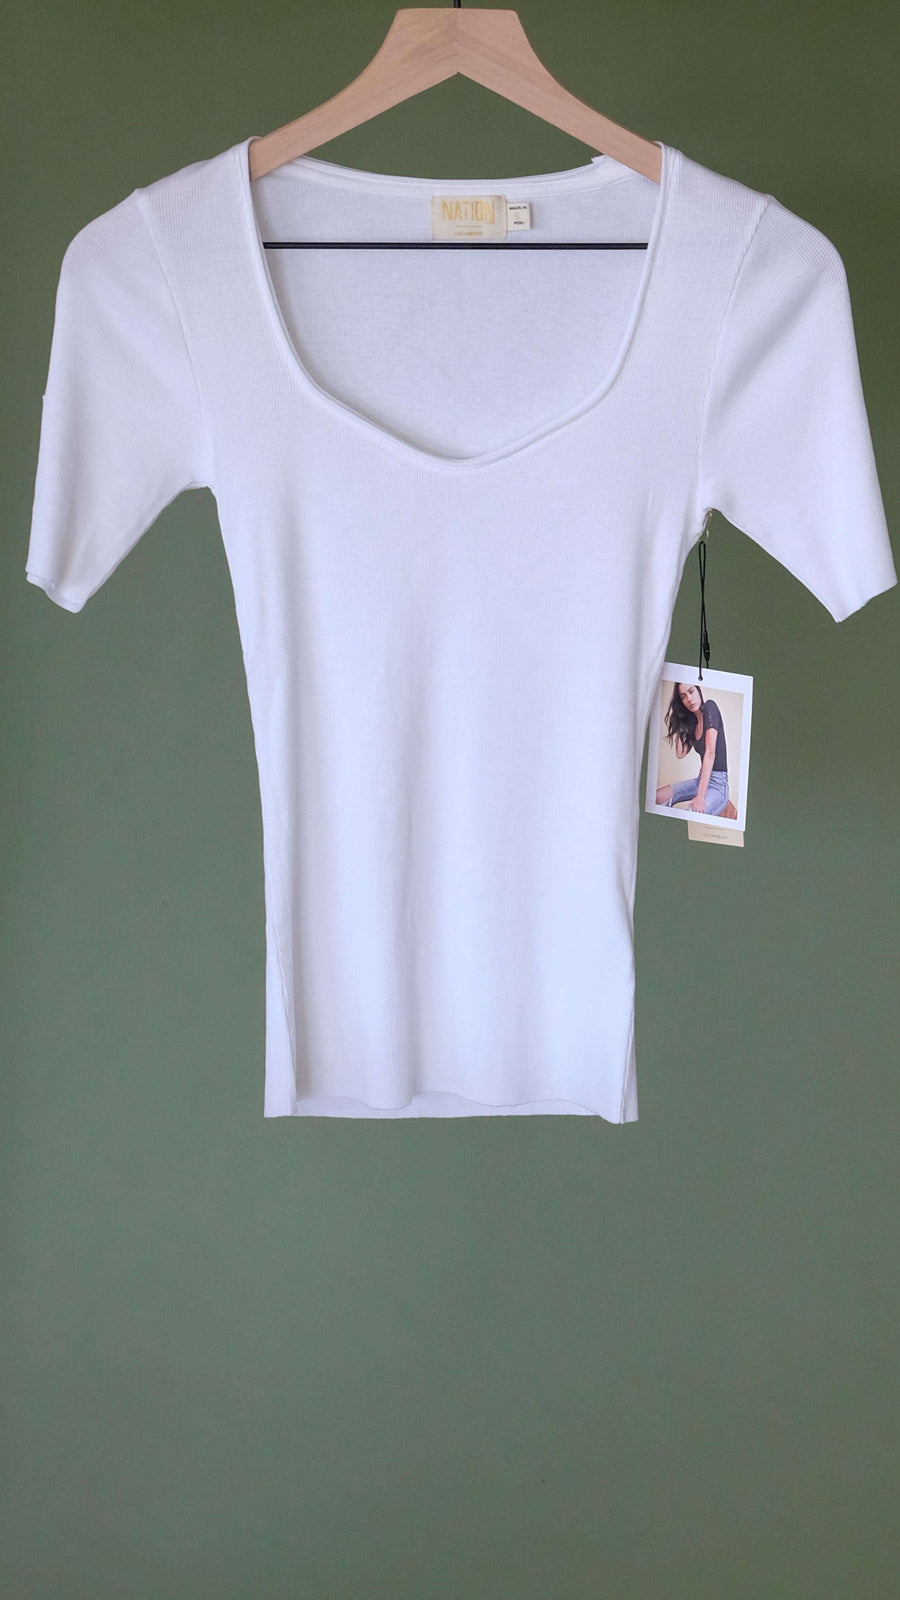 Eris Button Sleeve Sweetheart Tee in White by Nation LTD